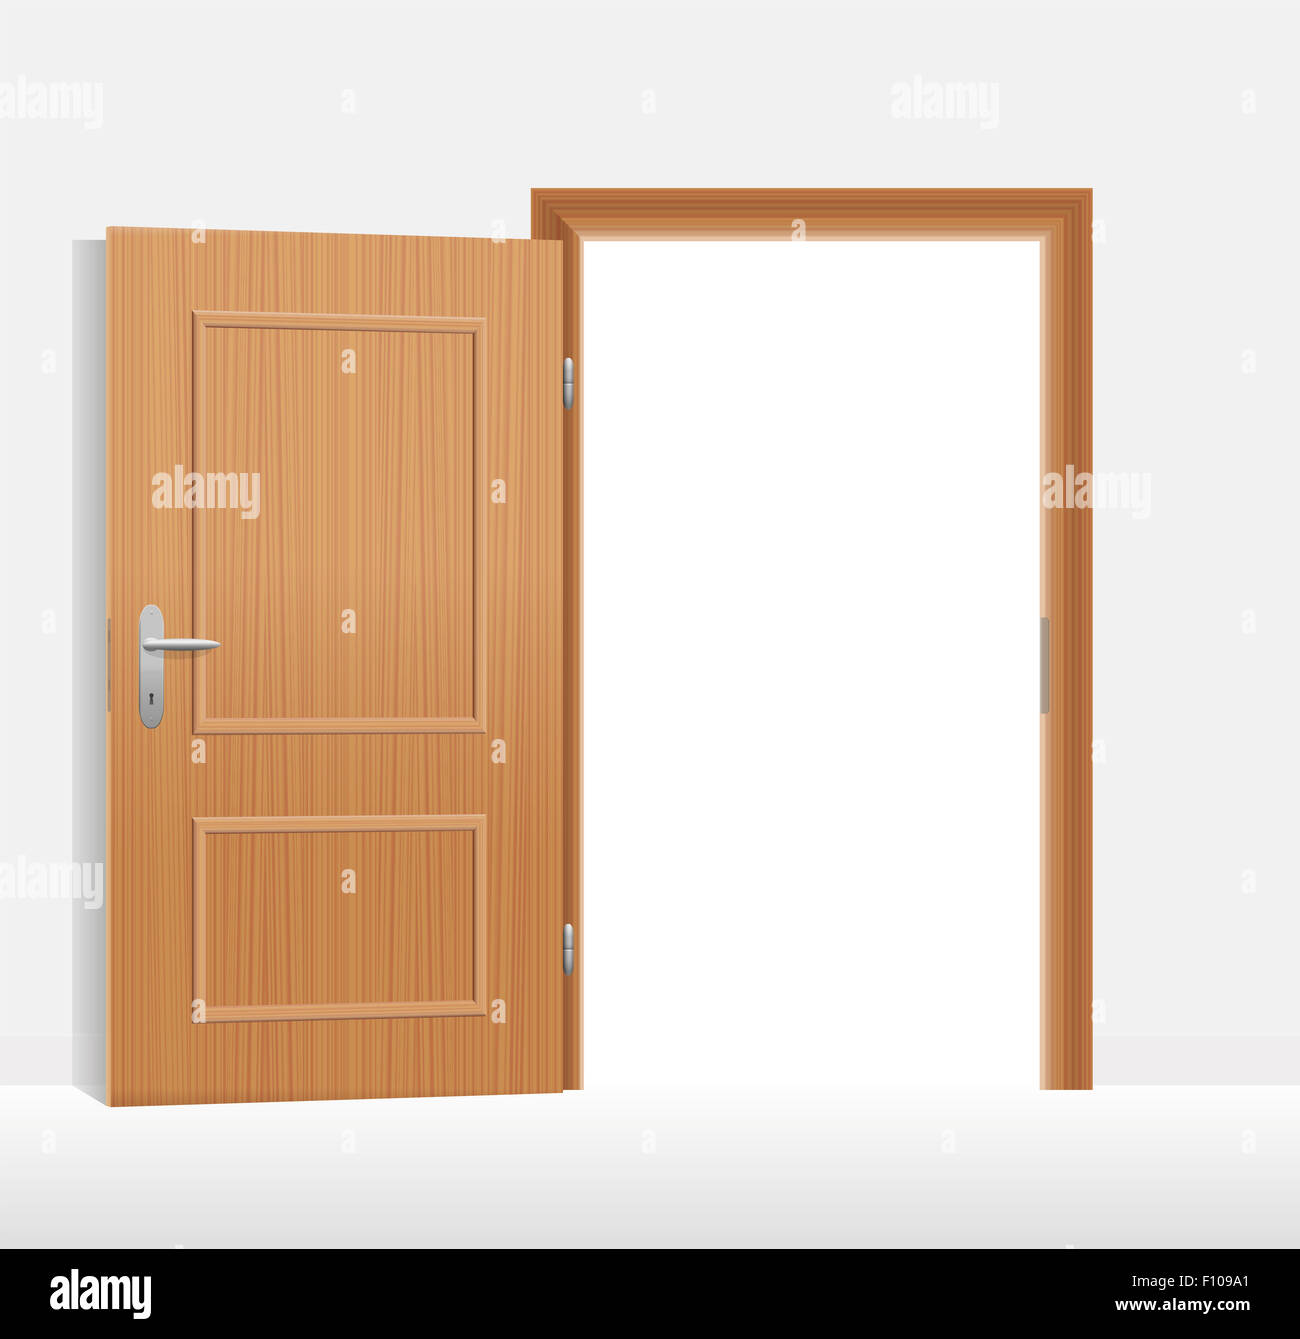 Illustration of an open door to a bright white room. Stock Photo